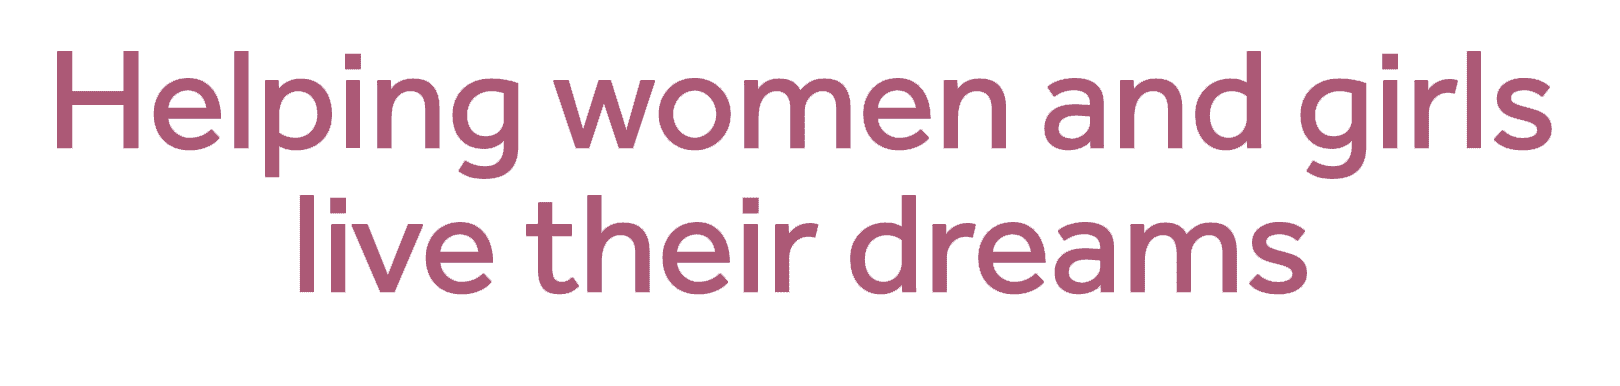 Helping women and girls live their dreams pink